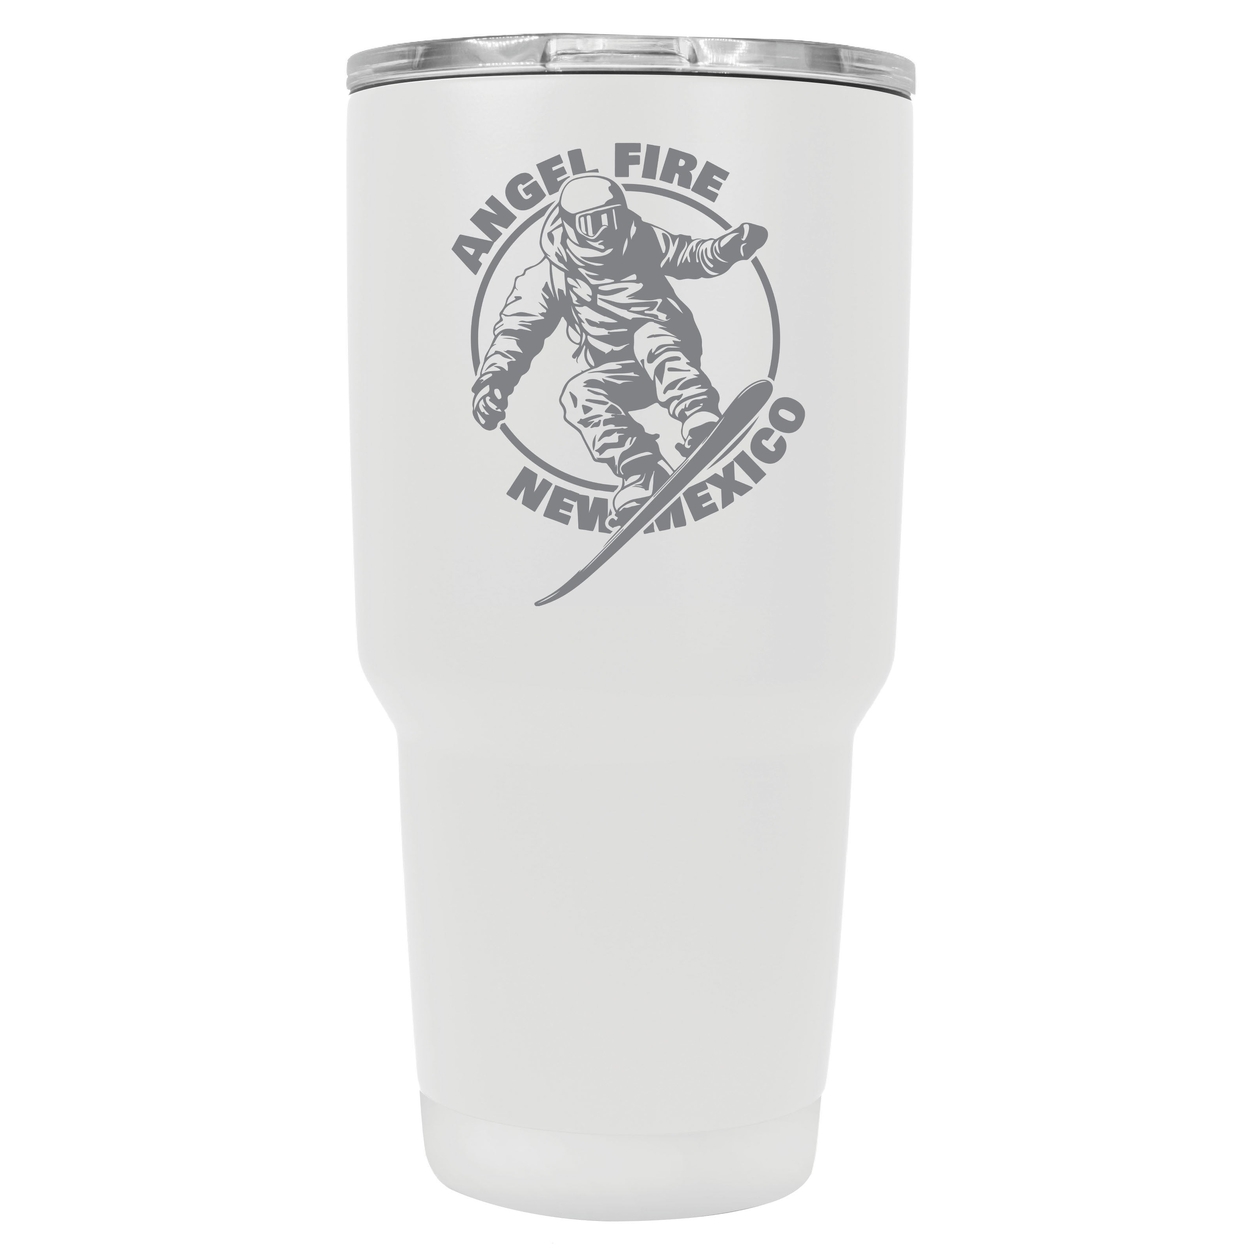 Angel Fire New Mexico Souvenir 24 Oz Engraved Insulated Stainless Steel Tumbler - Coral,,4-Pack